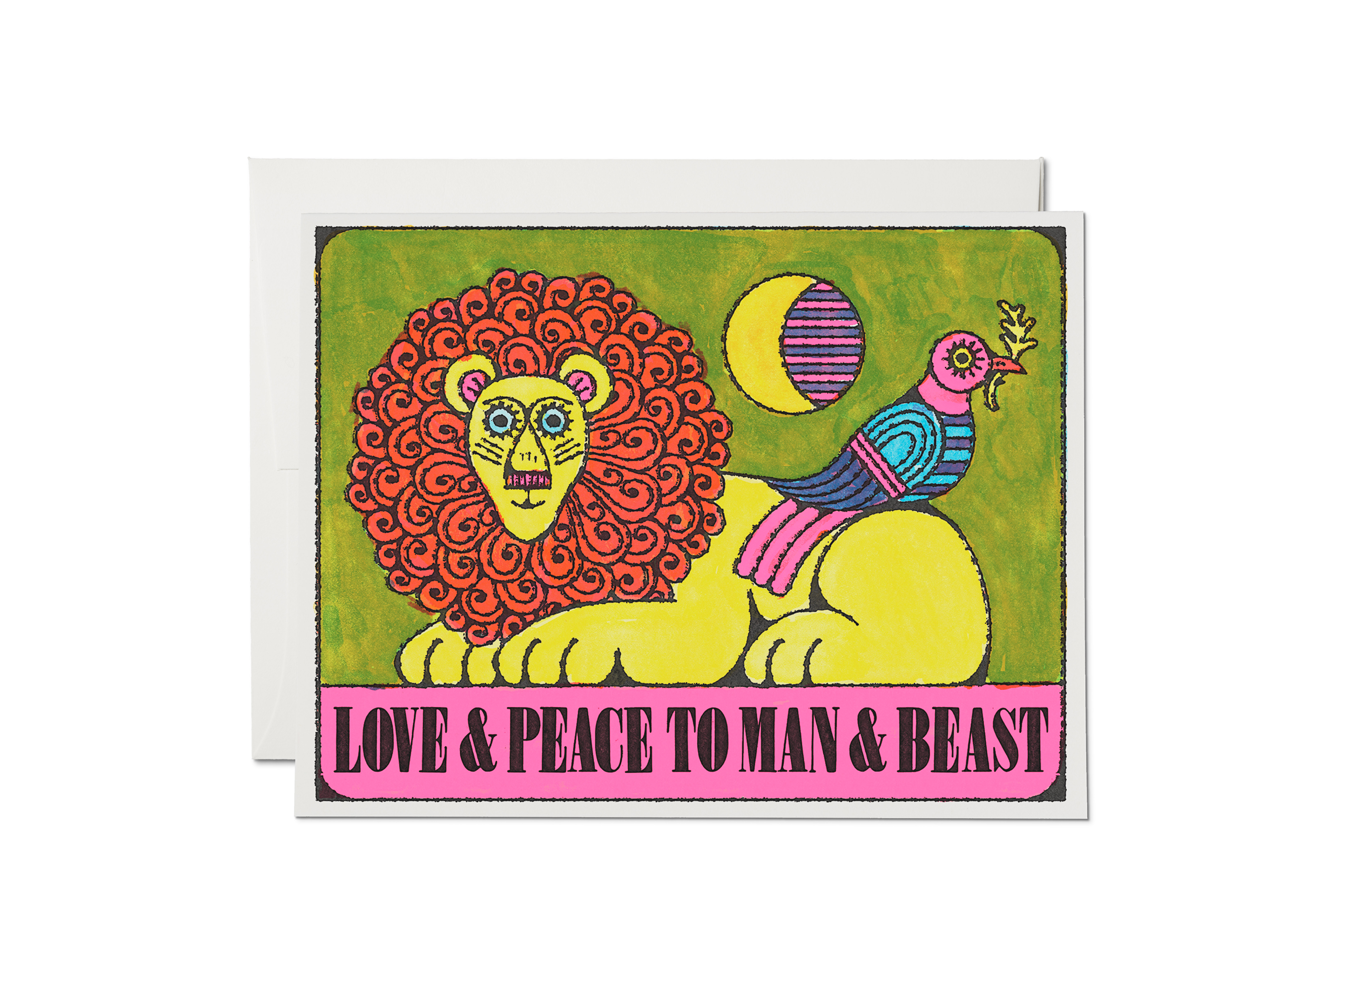 Man and Beast holiday greeting card - The Crowd Went Wild